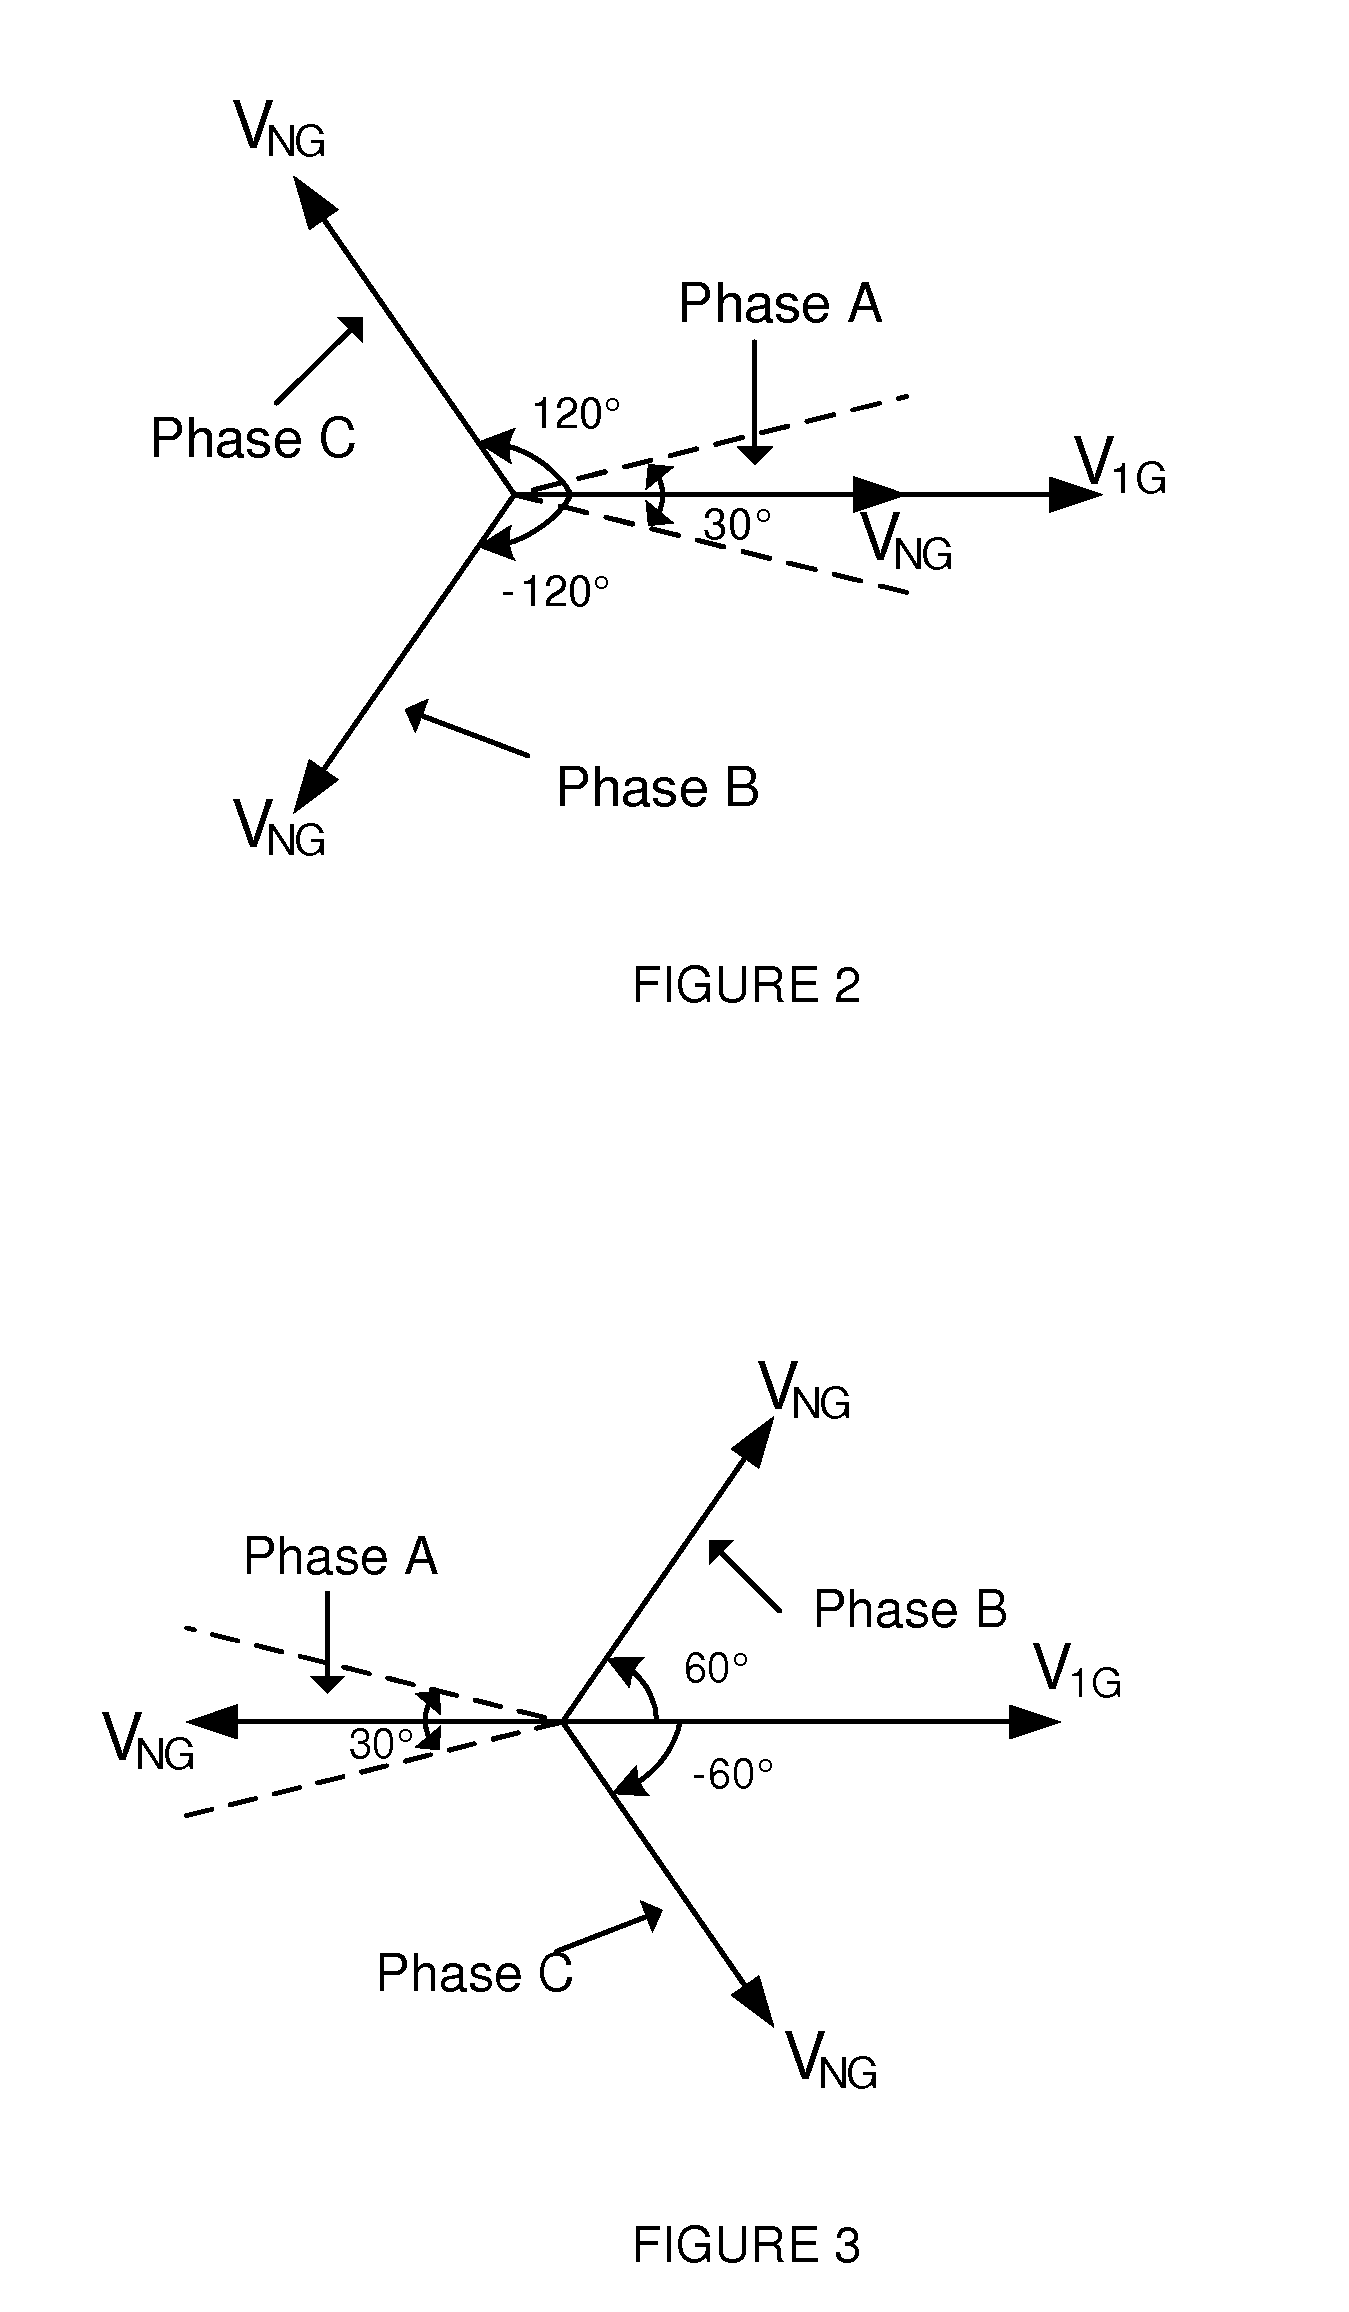 Apparatus and method for identifying a faulted phase in a shunt capacitor bank